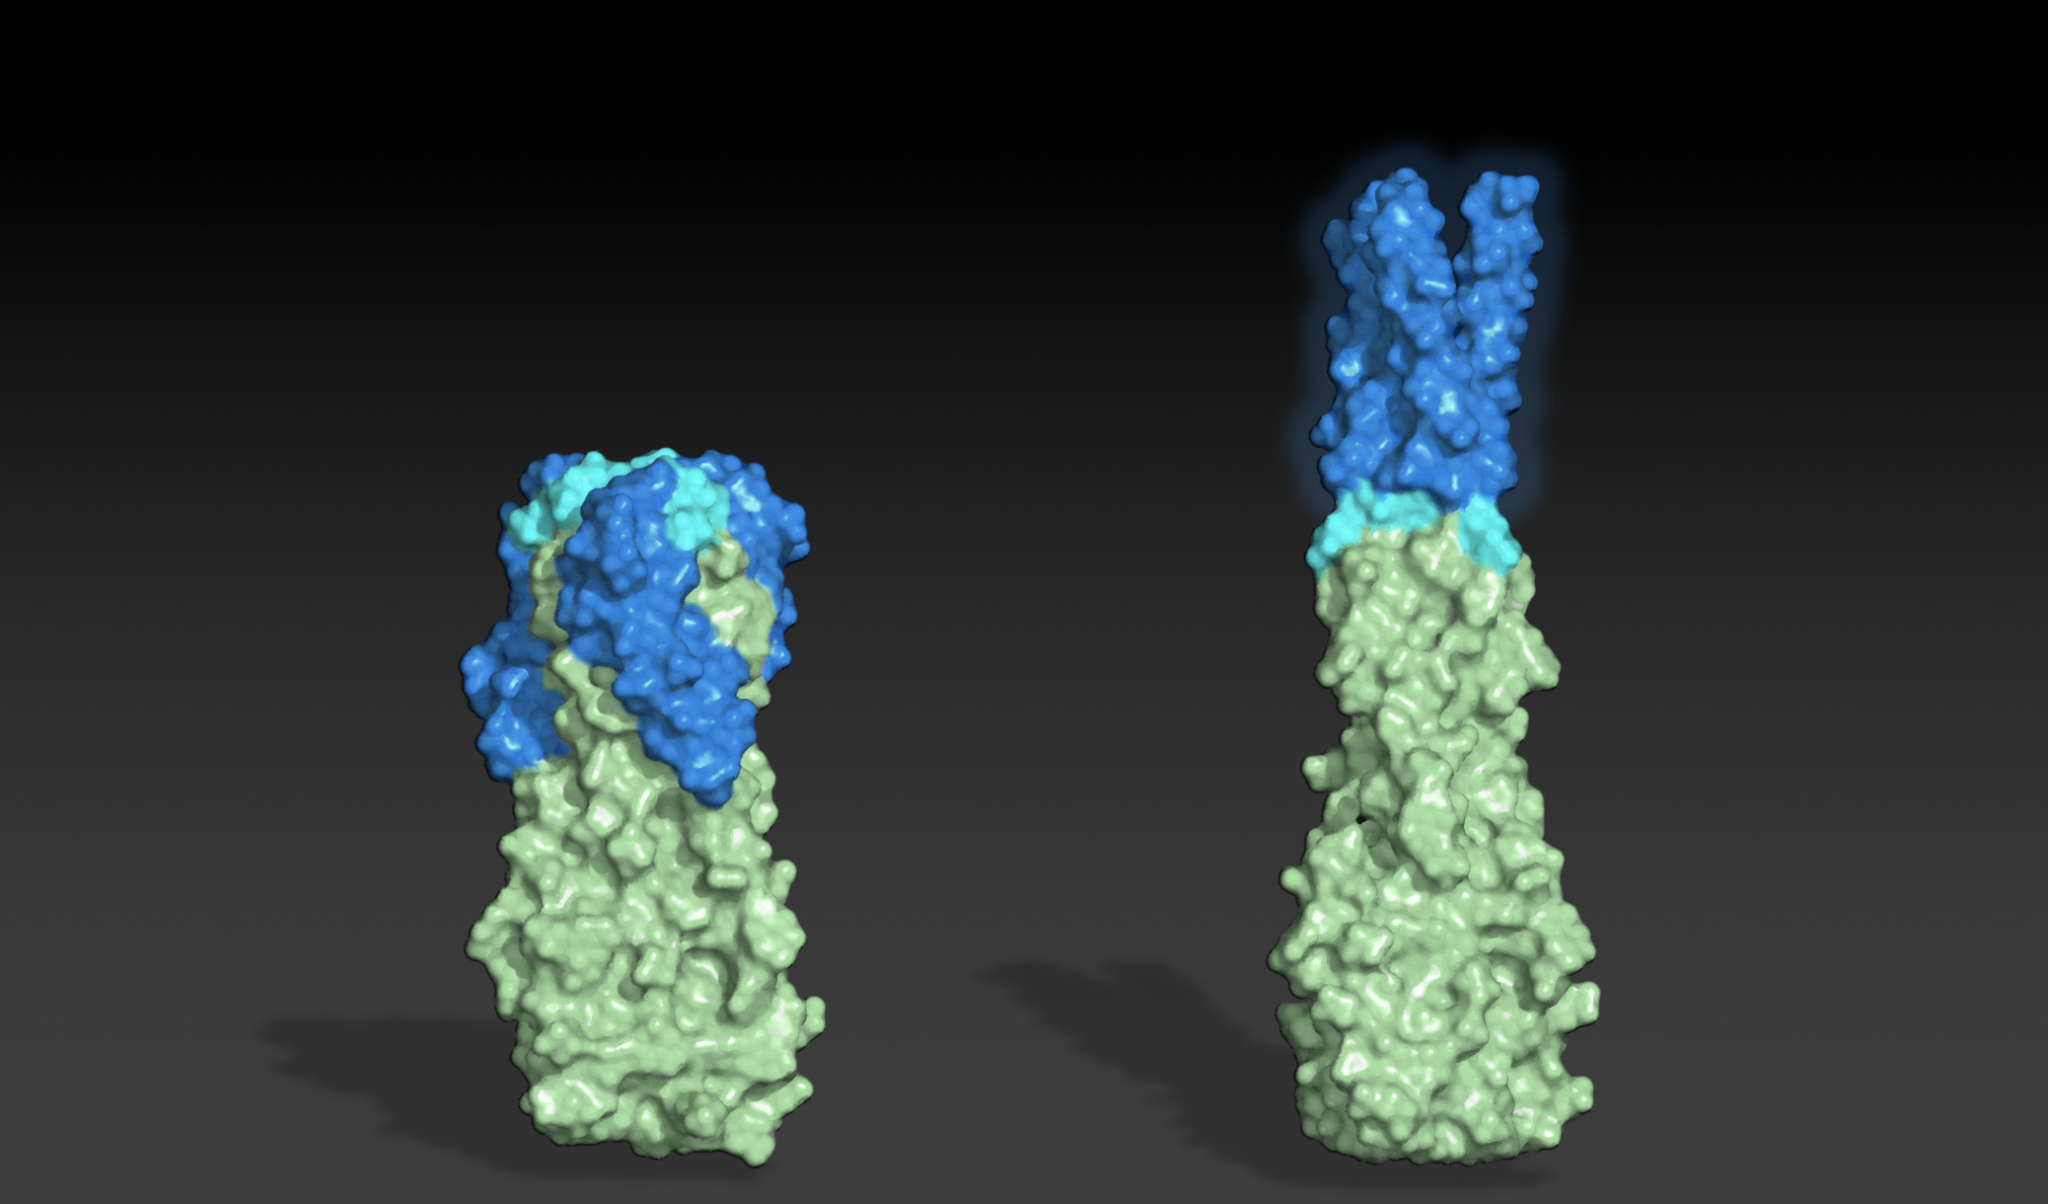 Designing shape-shifting proteins